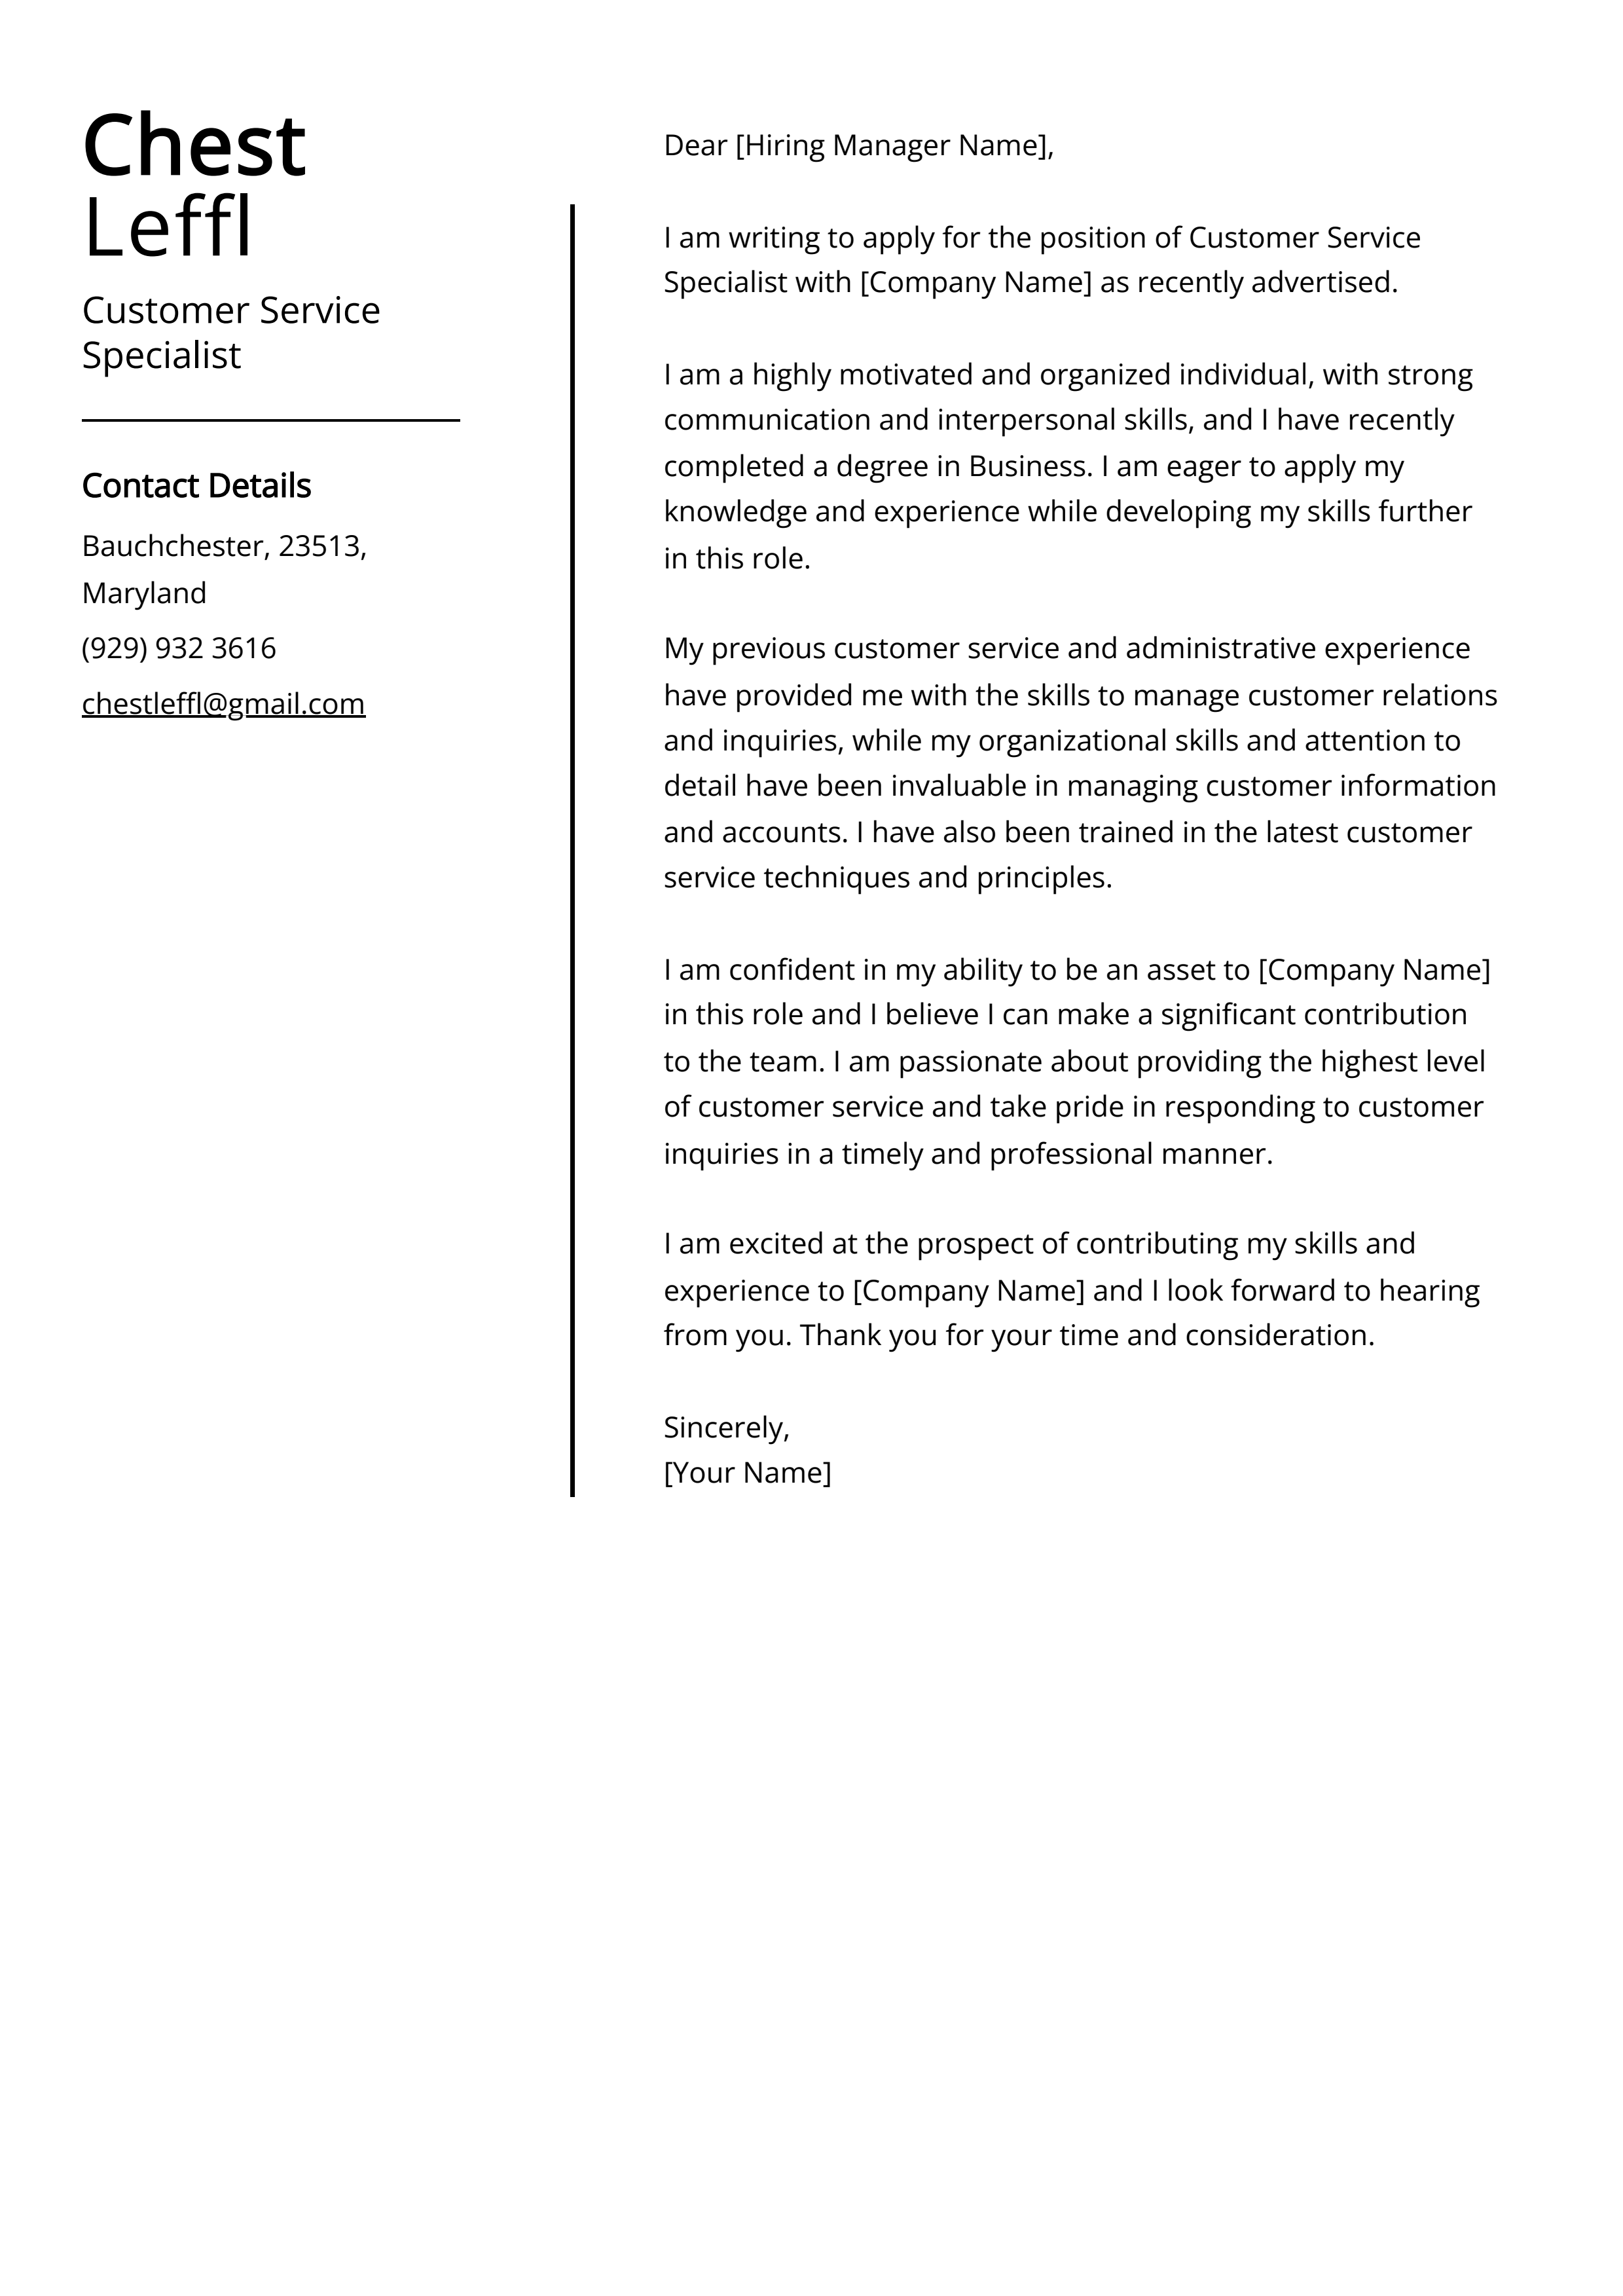 Customer Service Specialist Cover Letter Example